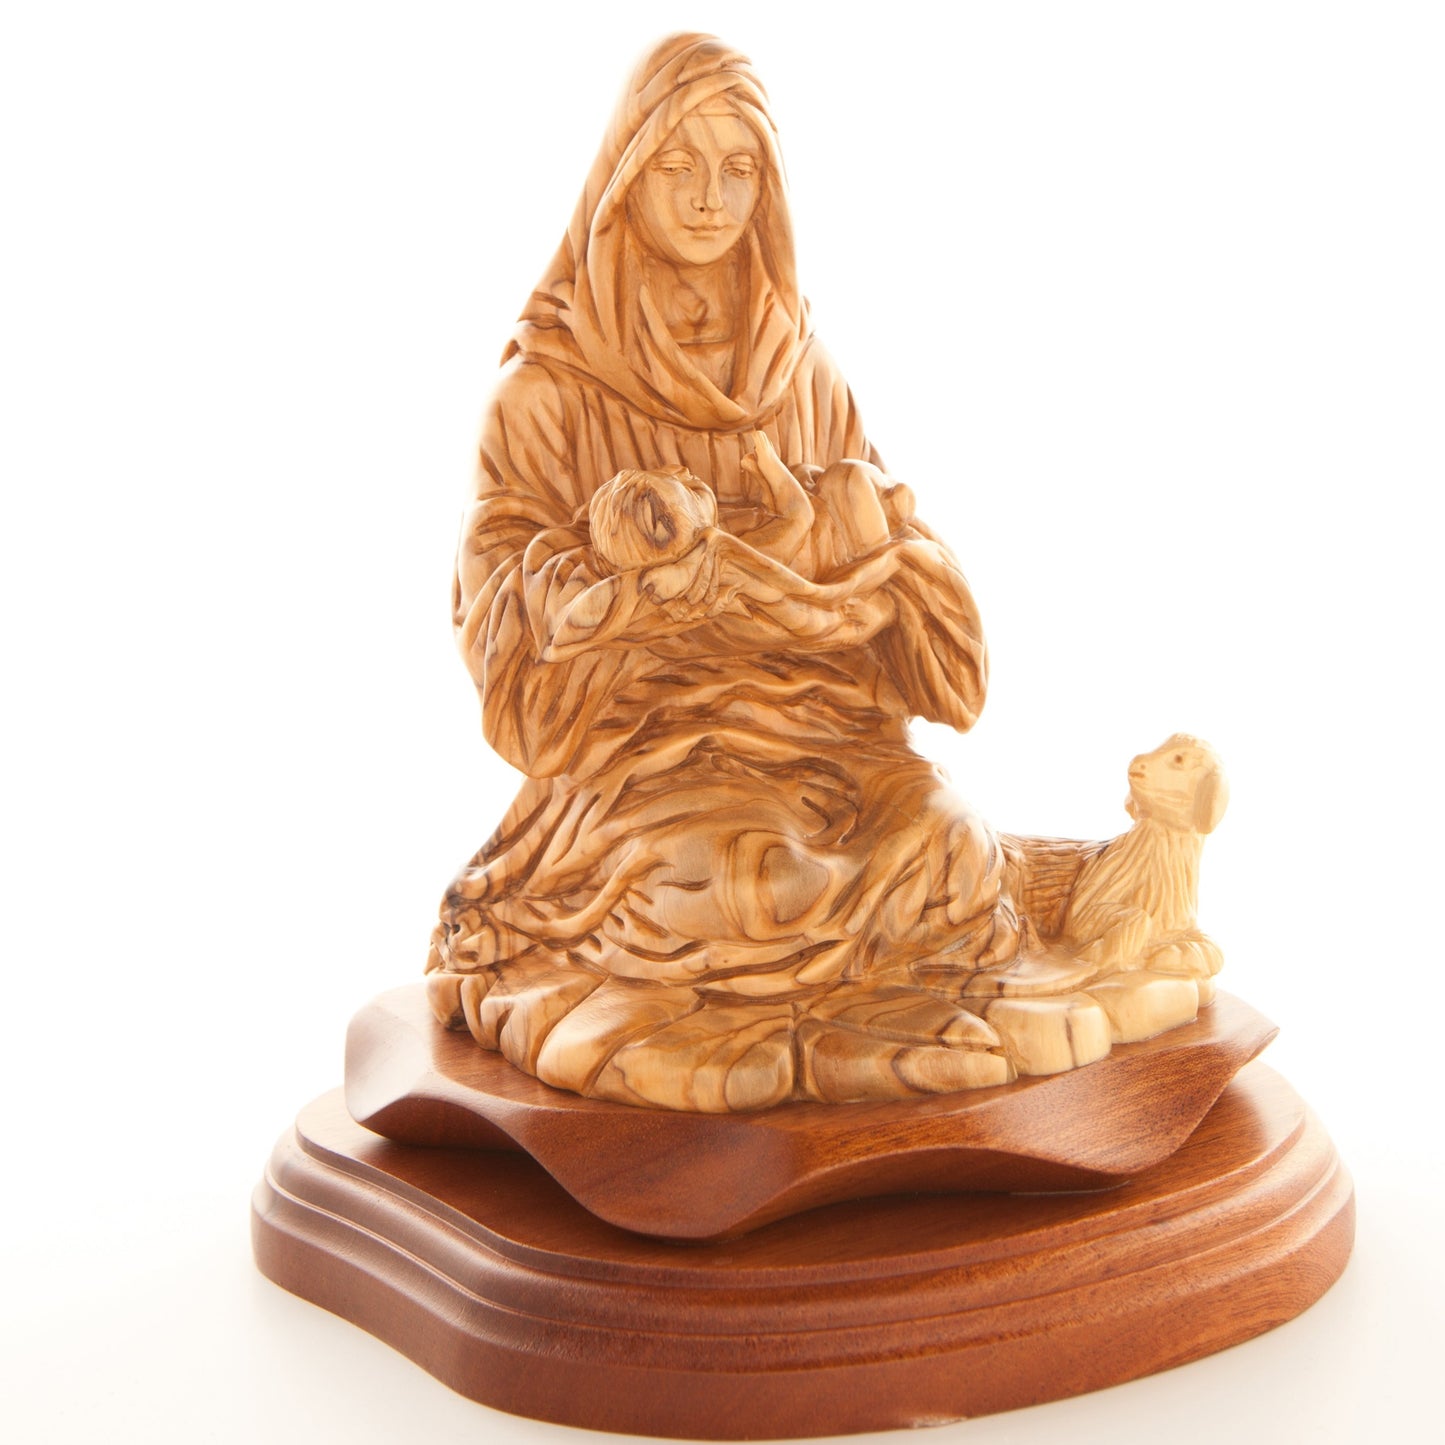 Virgin Mary with Sleeping Christ Child 8.1", Carved from the Holy Land Olive Wood